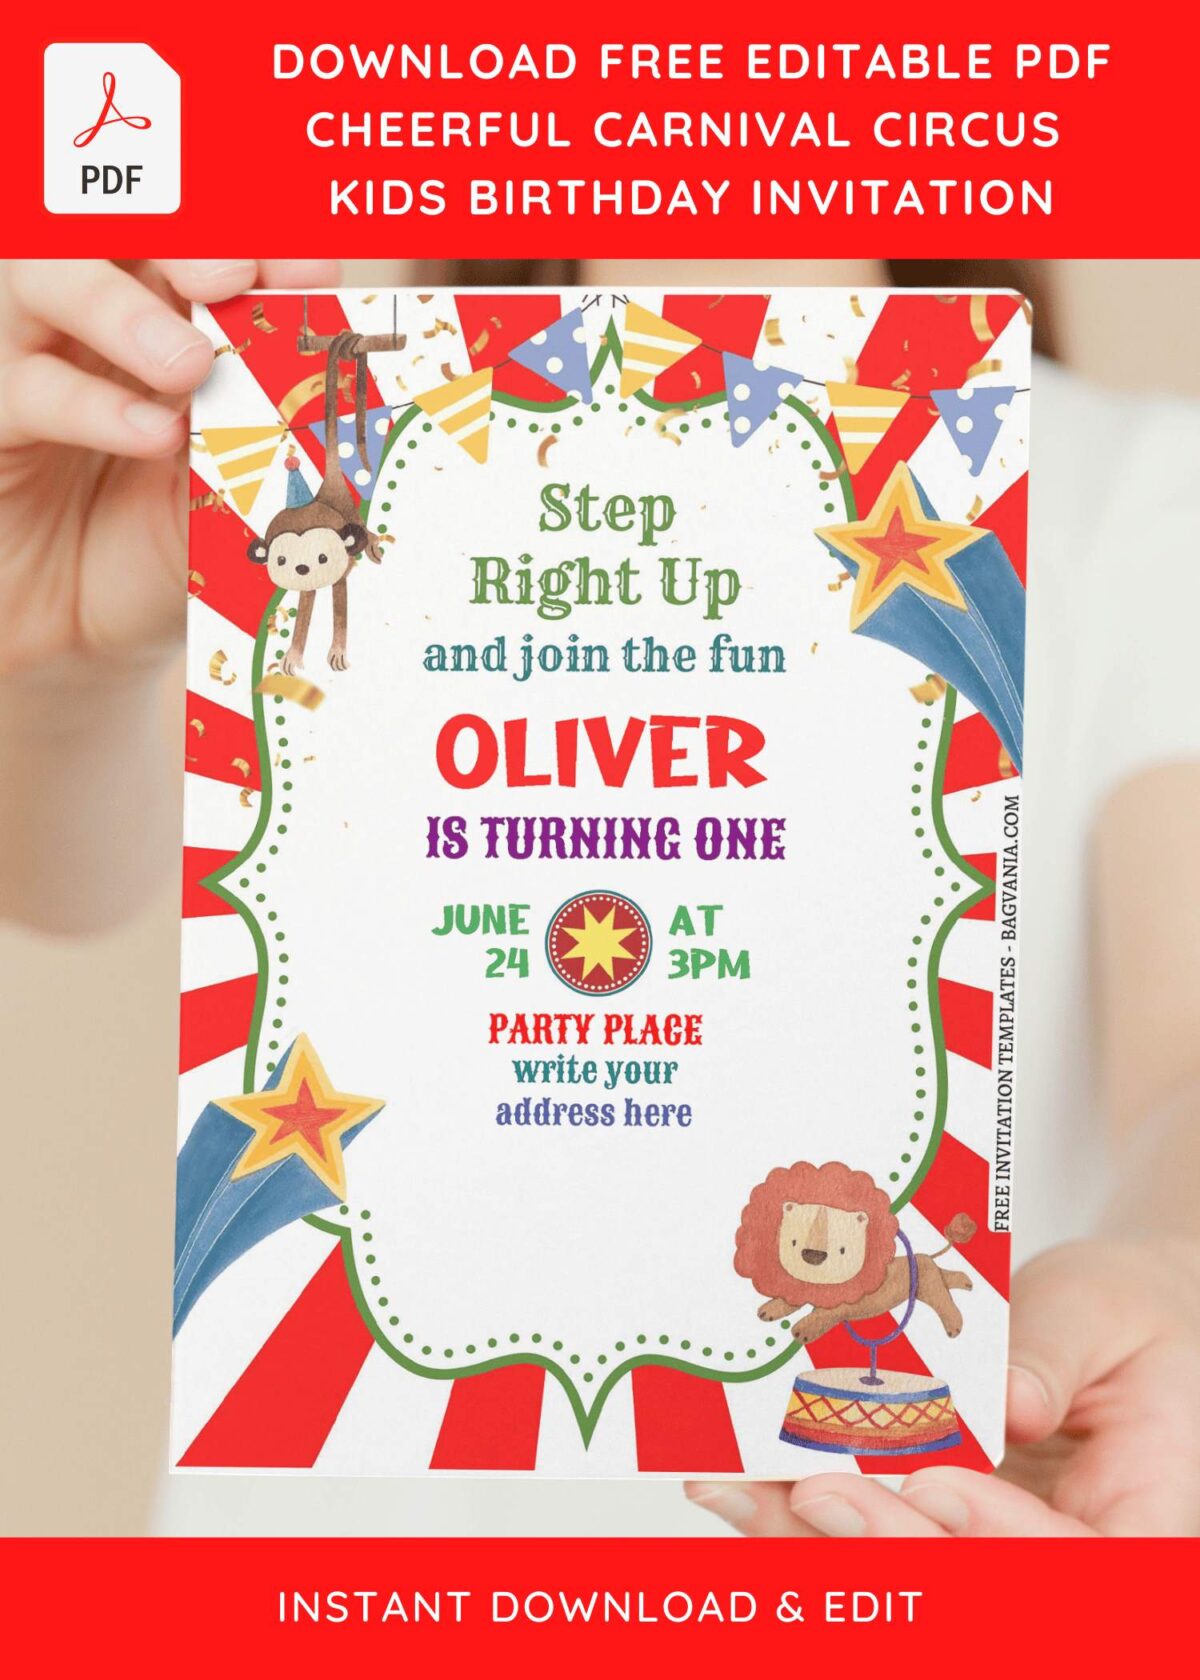 (Free Editable PDF) Cute Vintage Circus Birthday Invitation Templates with colorful bunting flags